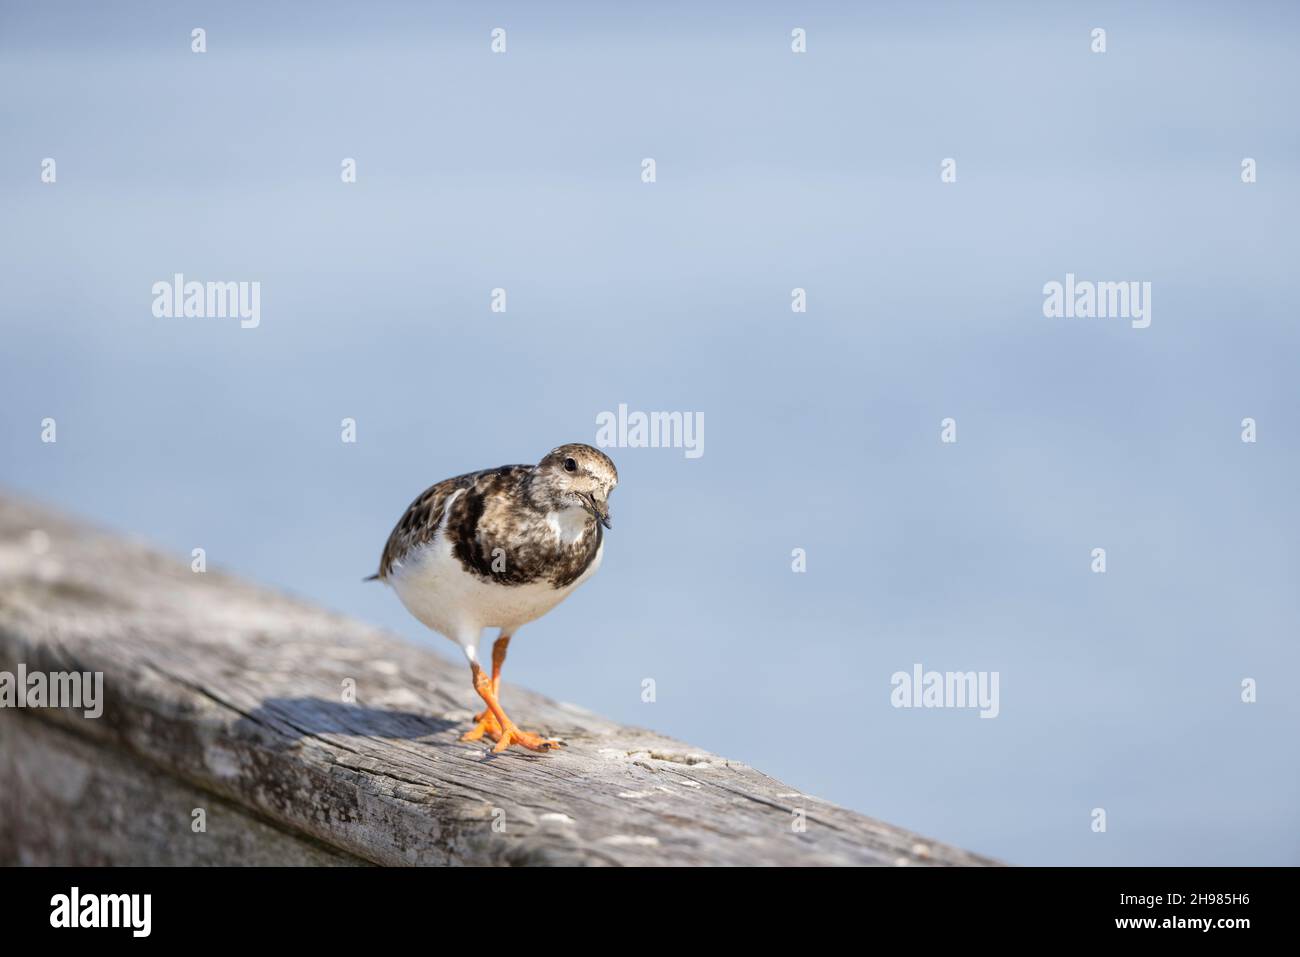 A close-up of a ruddy turnstone (Arenaria interpres) standing on the rail of a pier with a clean background. Stock Photo